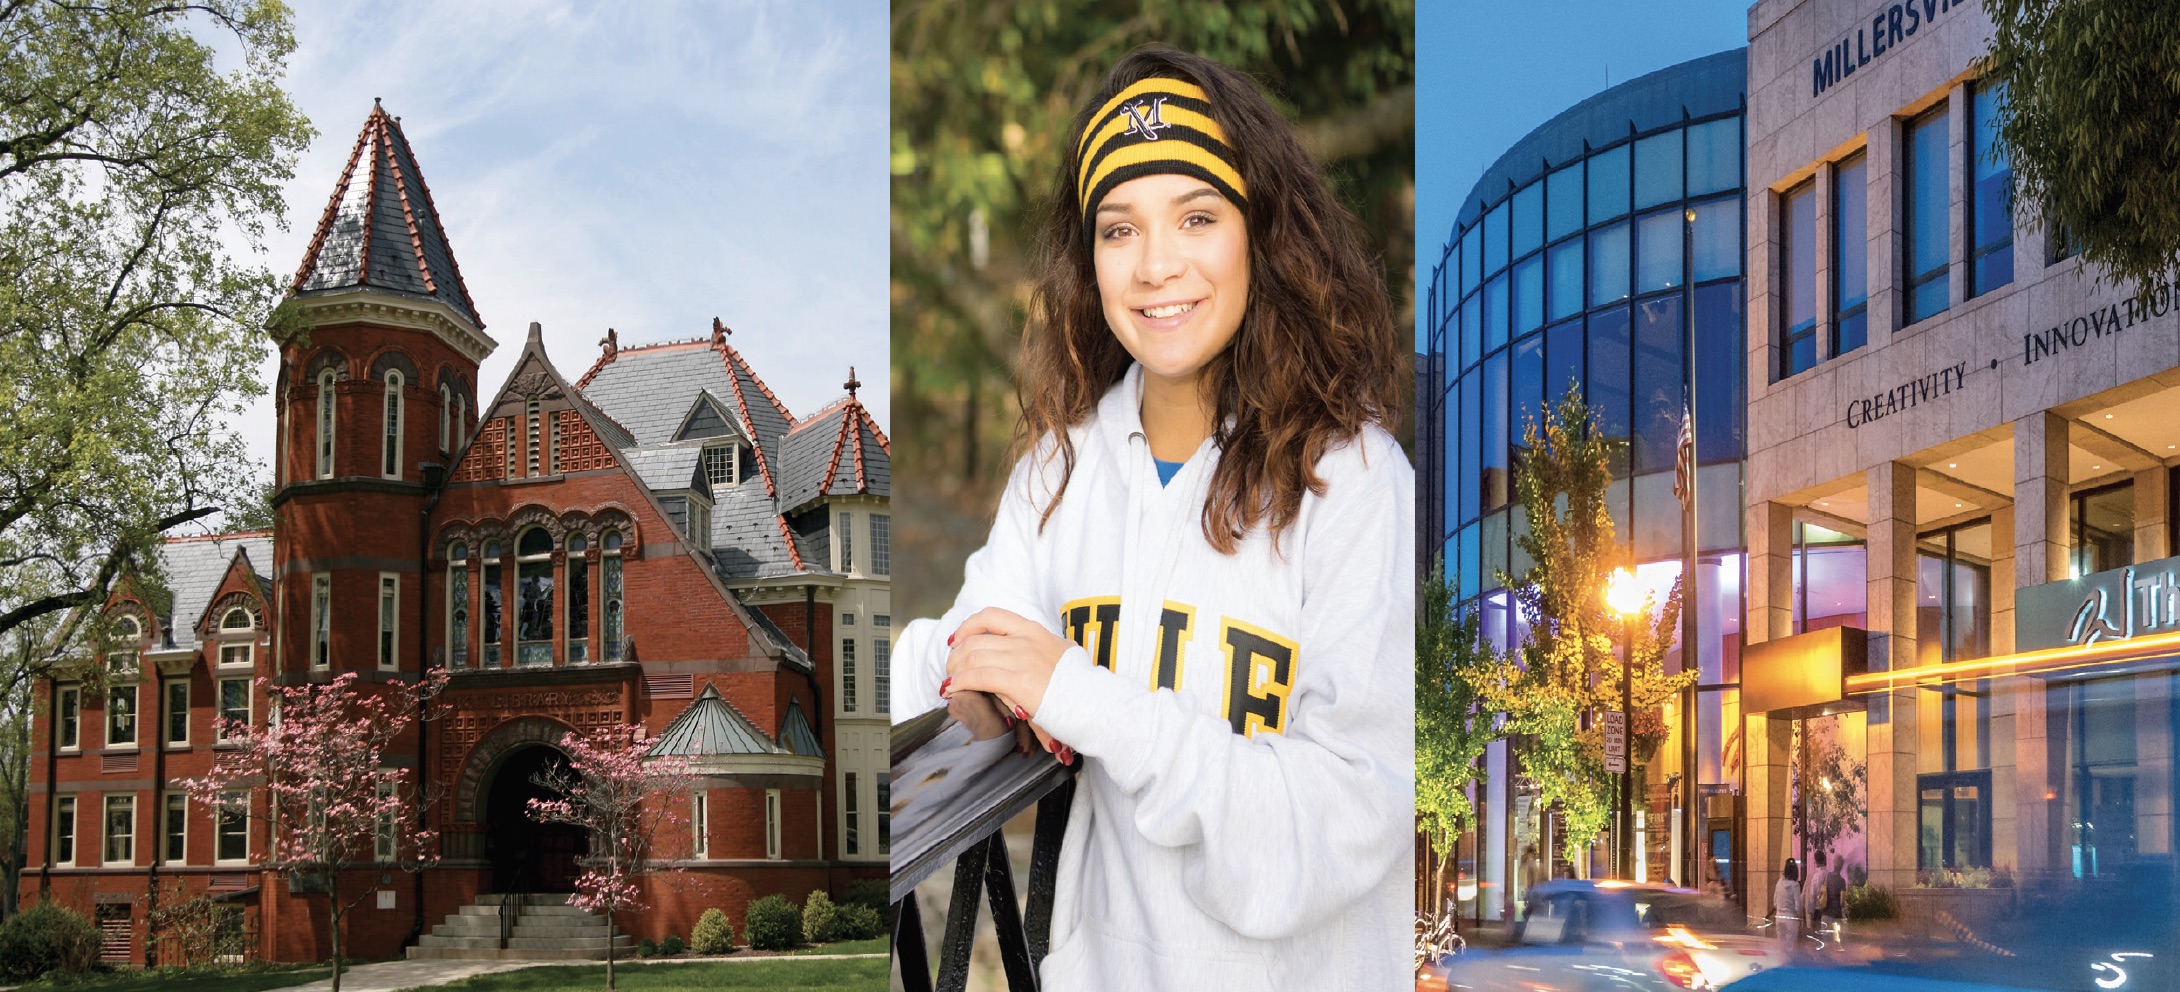 Millersville University: Graduate Opportunities in Technology and Innovation